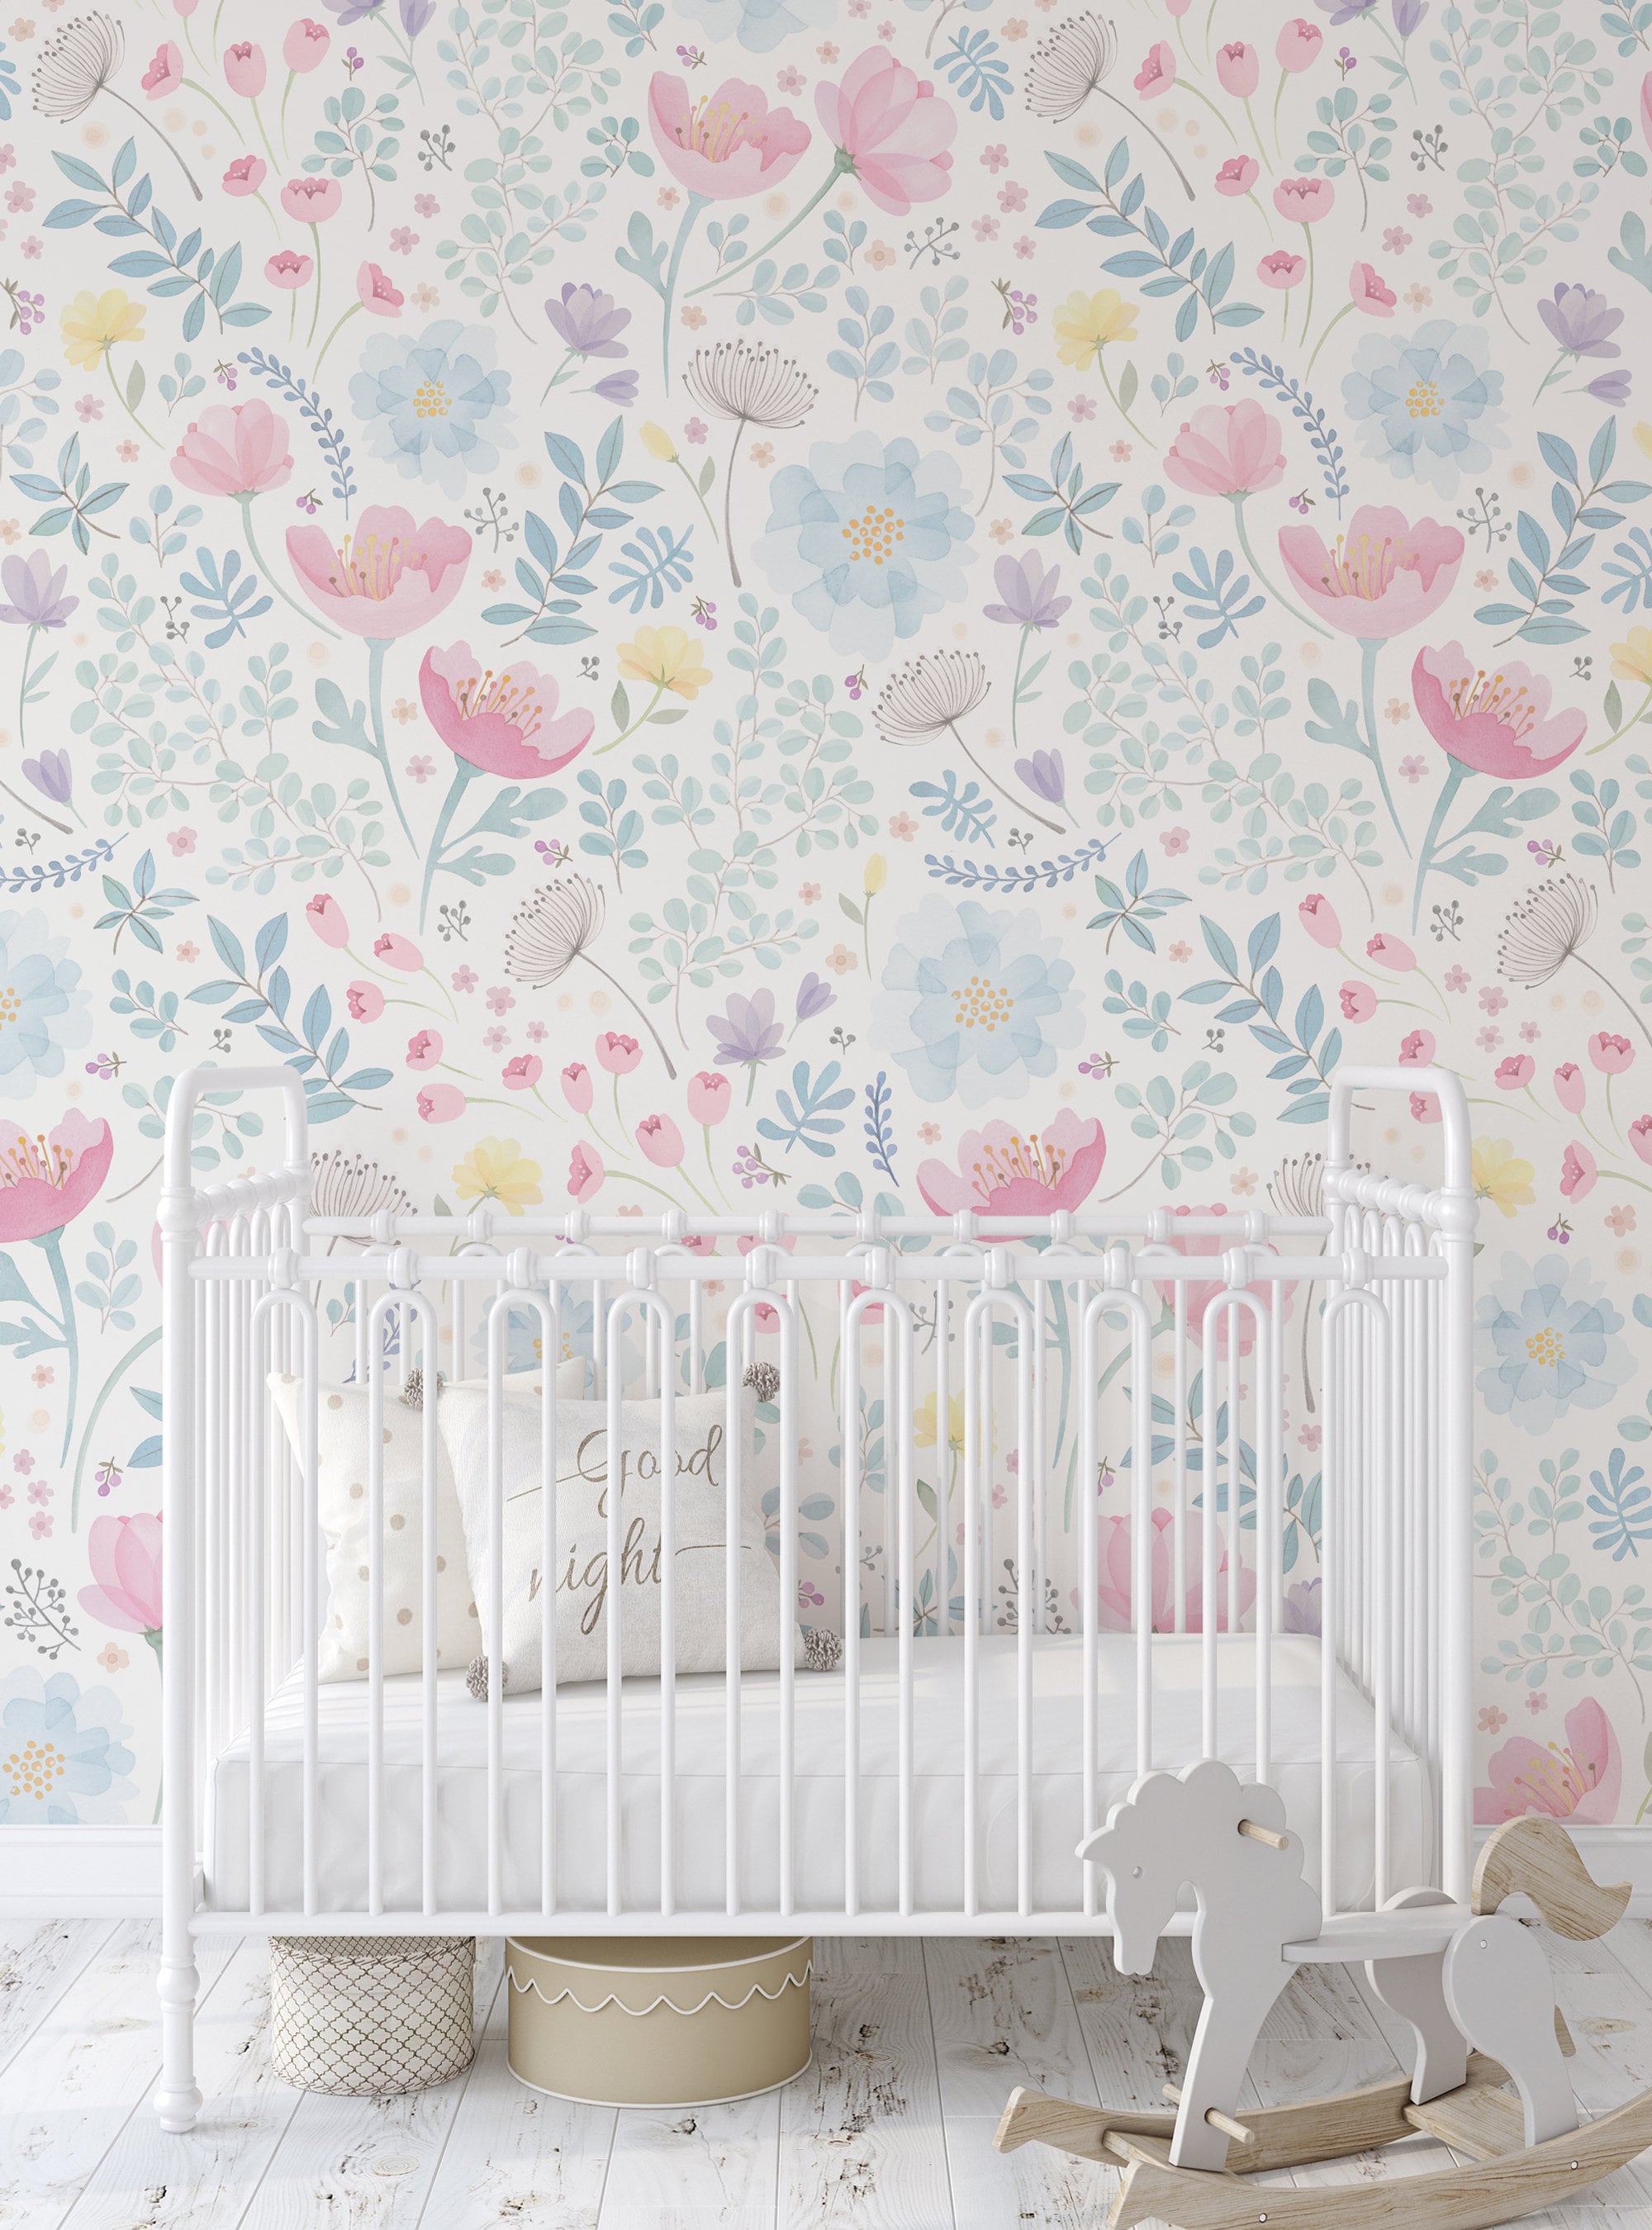 Whimsy Floral Watercolor Mural Wallpaper Pink Blue Peel and - Etsy UK